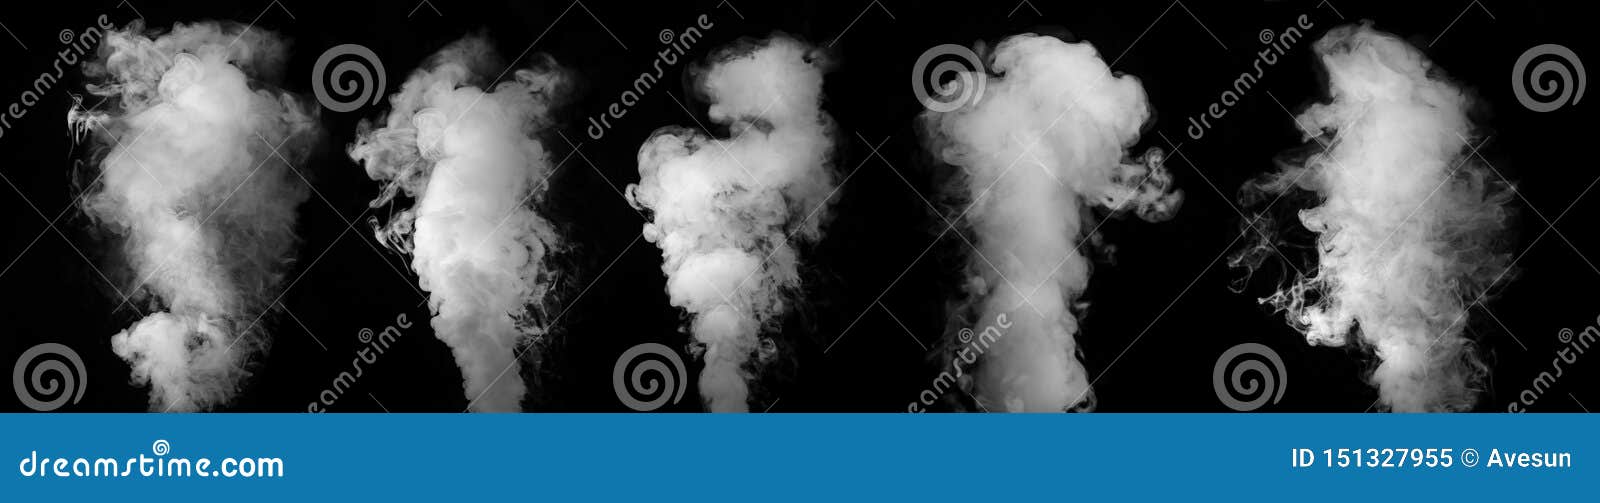 wide  of set of smoke or steam clouds over black background